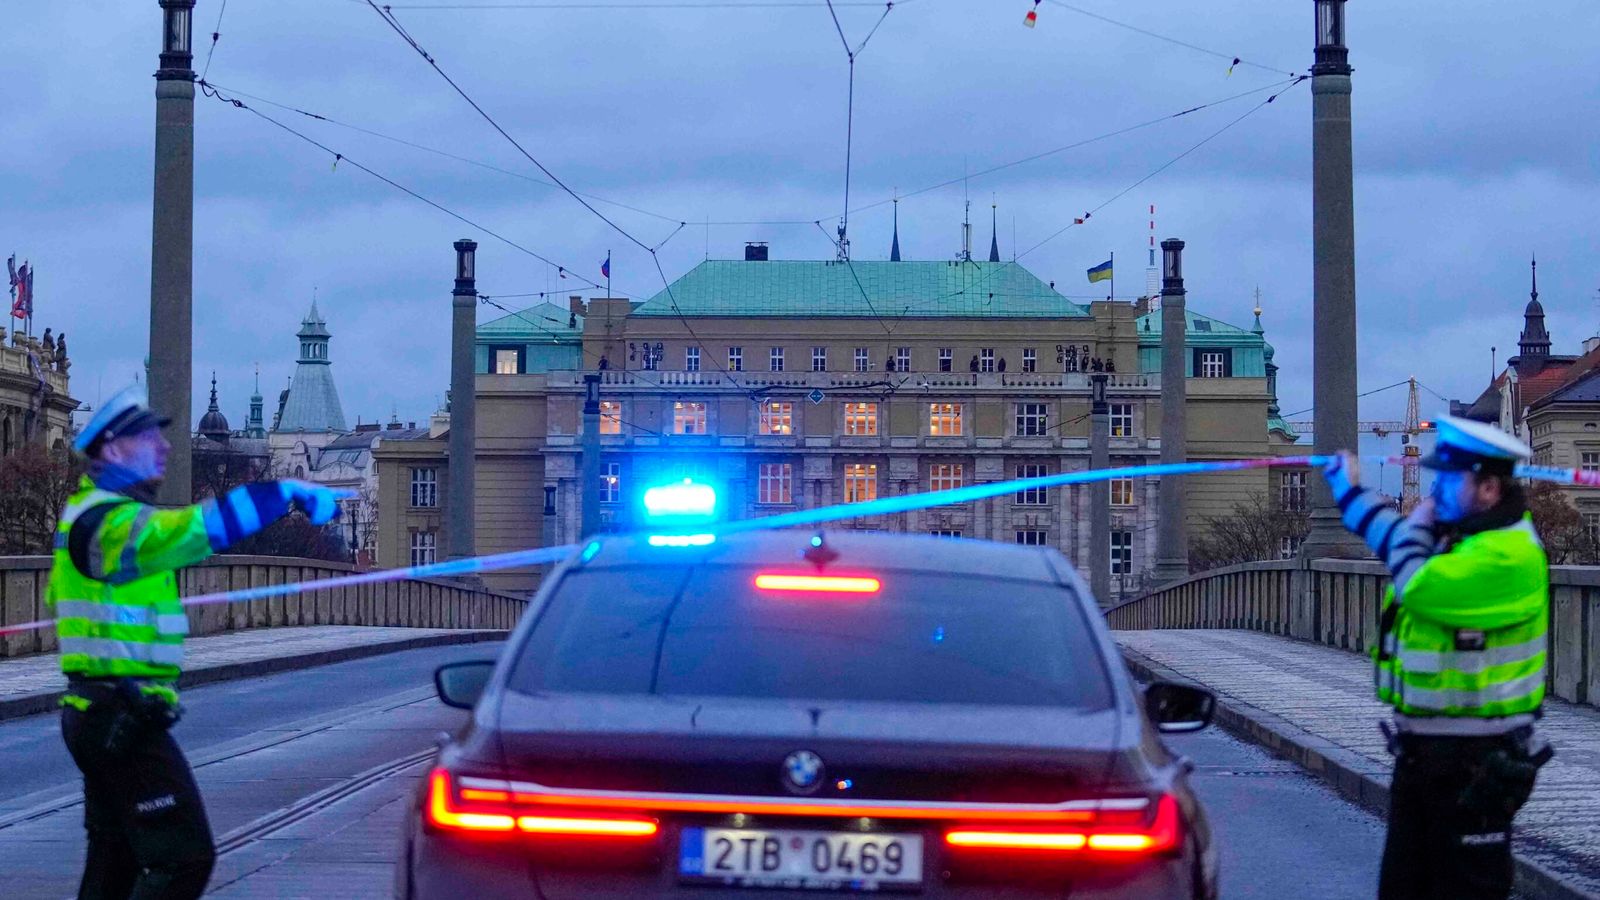 Shooting at University in Prague Leaves Multiple Dead and Injured